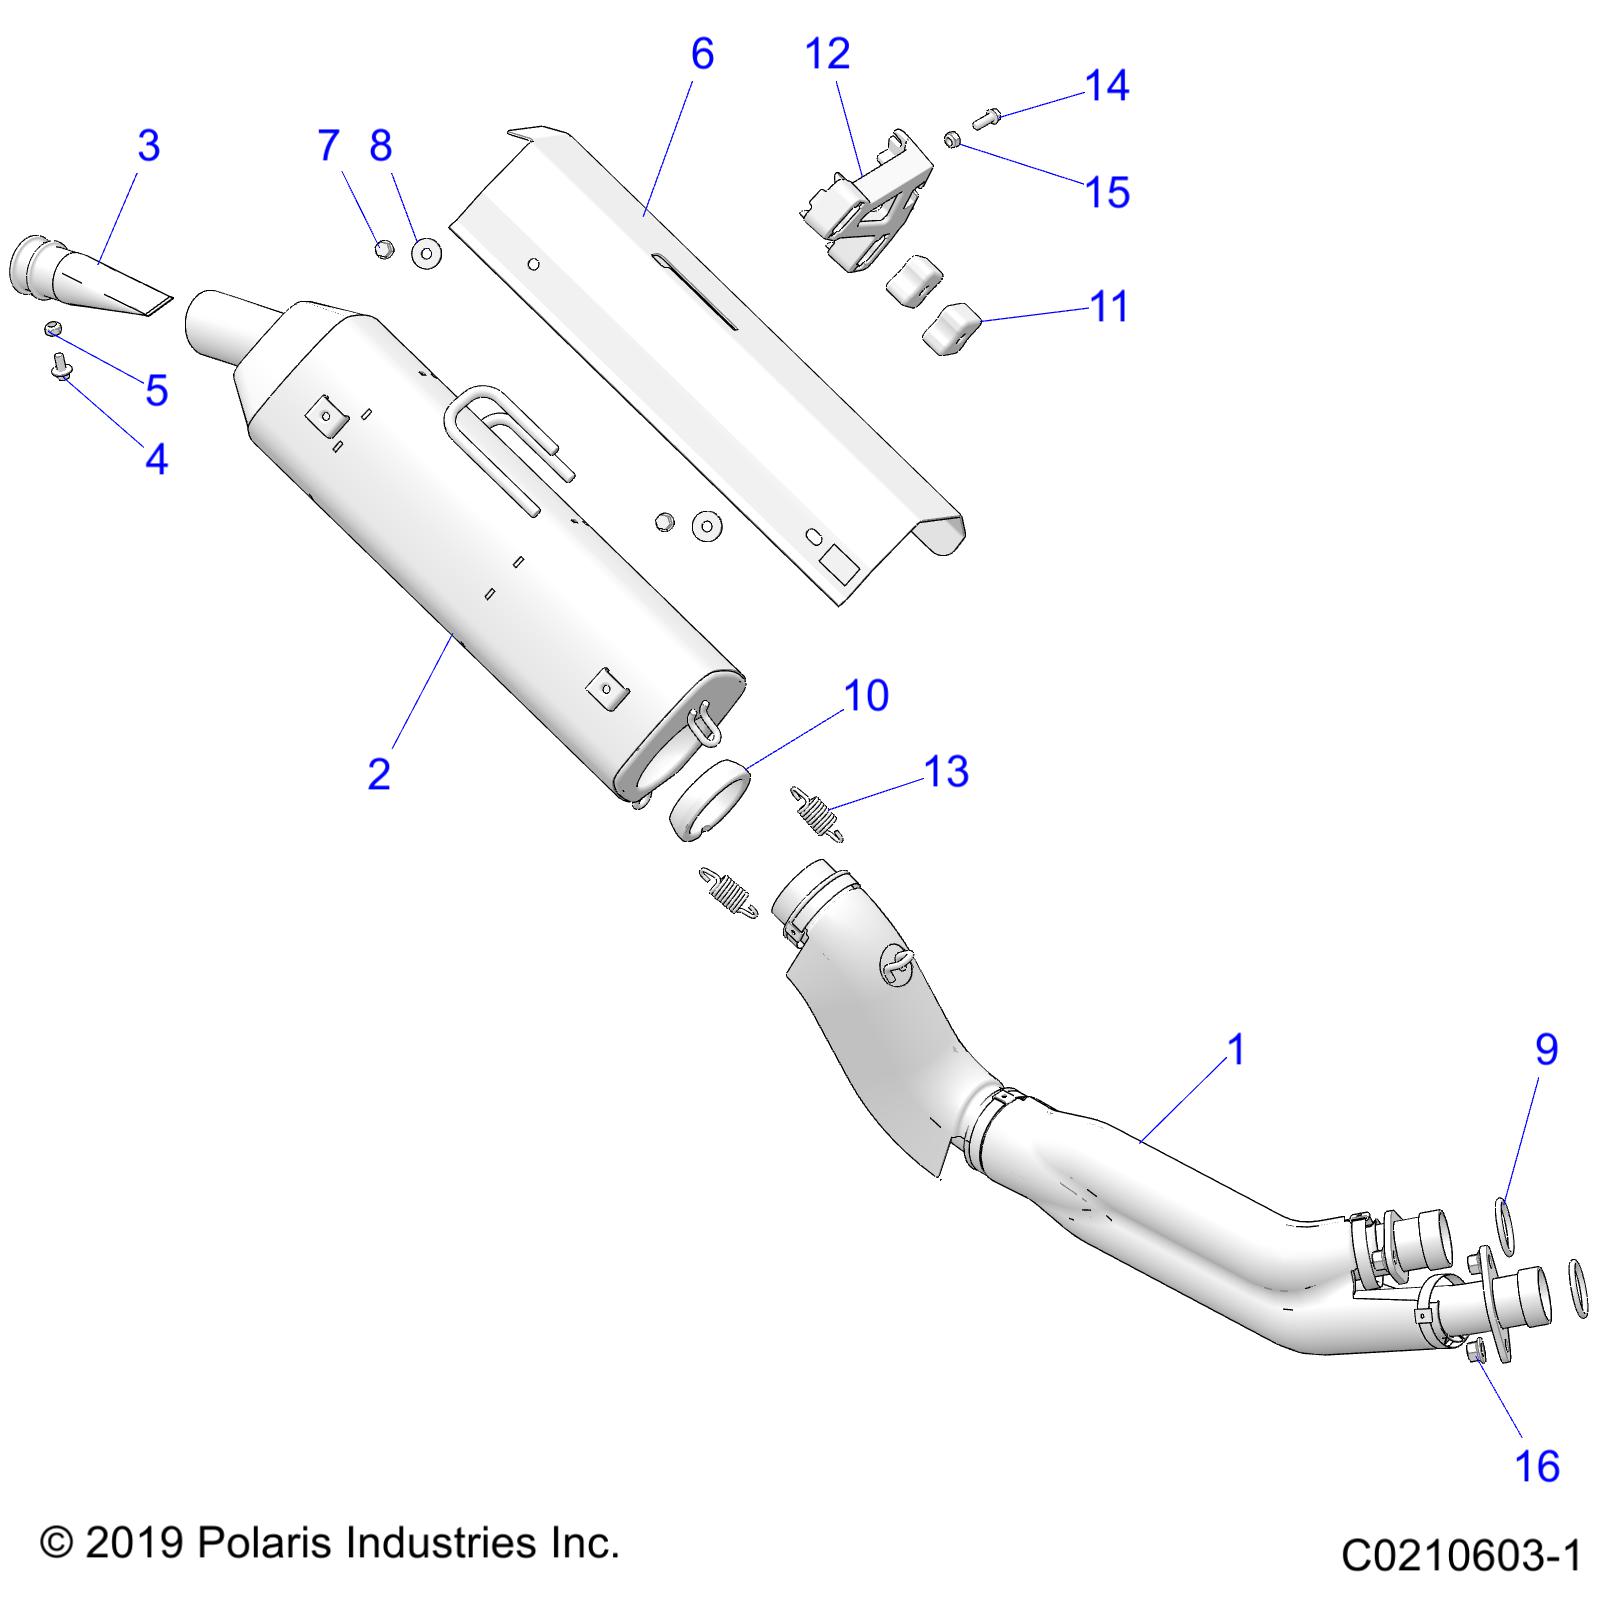 Part Number : 5257321 HEAT SHIELD EXHAUST SILENCER